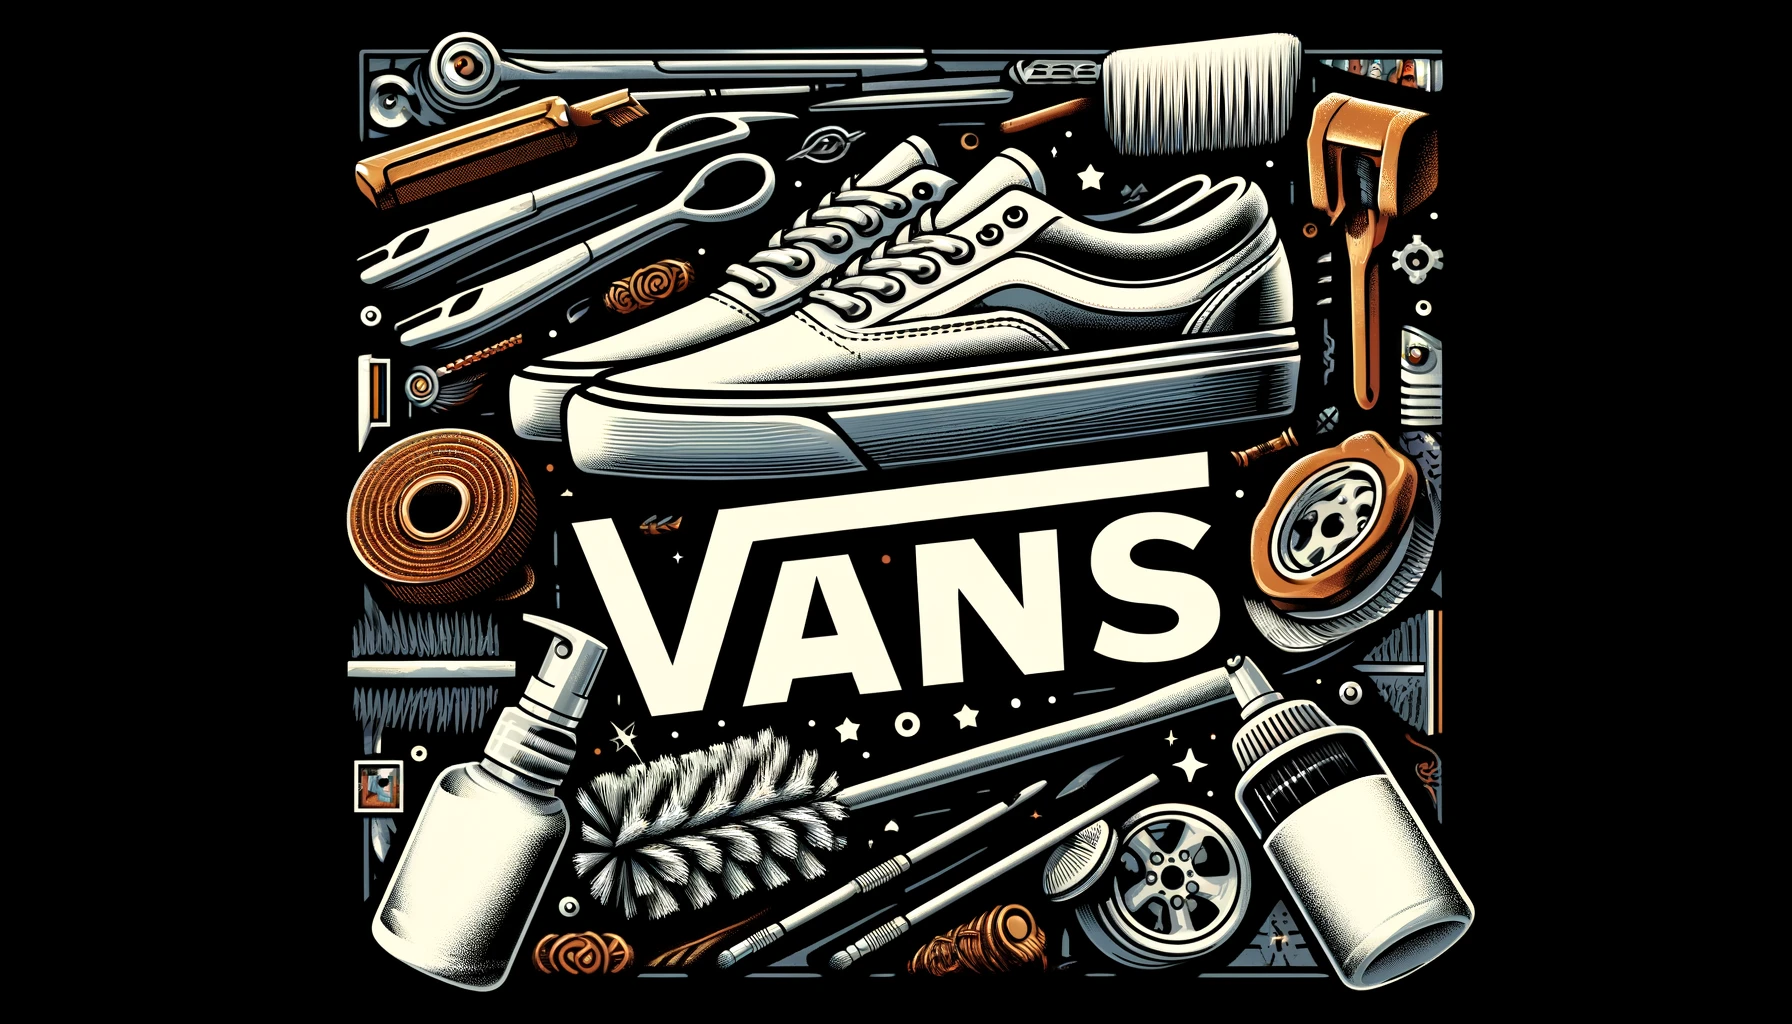 An image illustrating the maintenance of VANS shoes, with cleaning tools and a stylish background, featuring the text 'VANS' prominently.